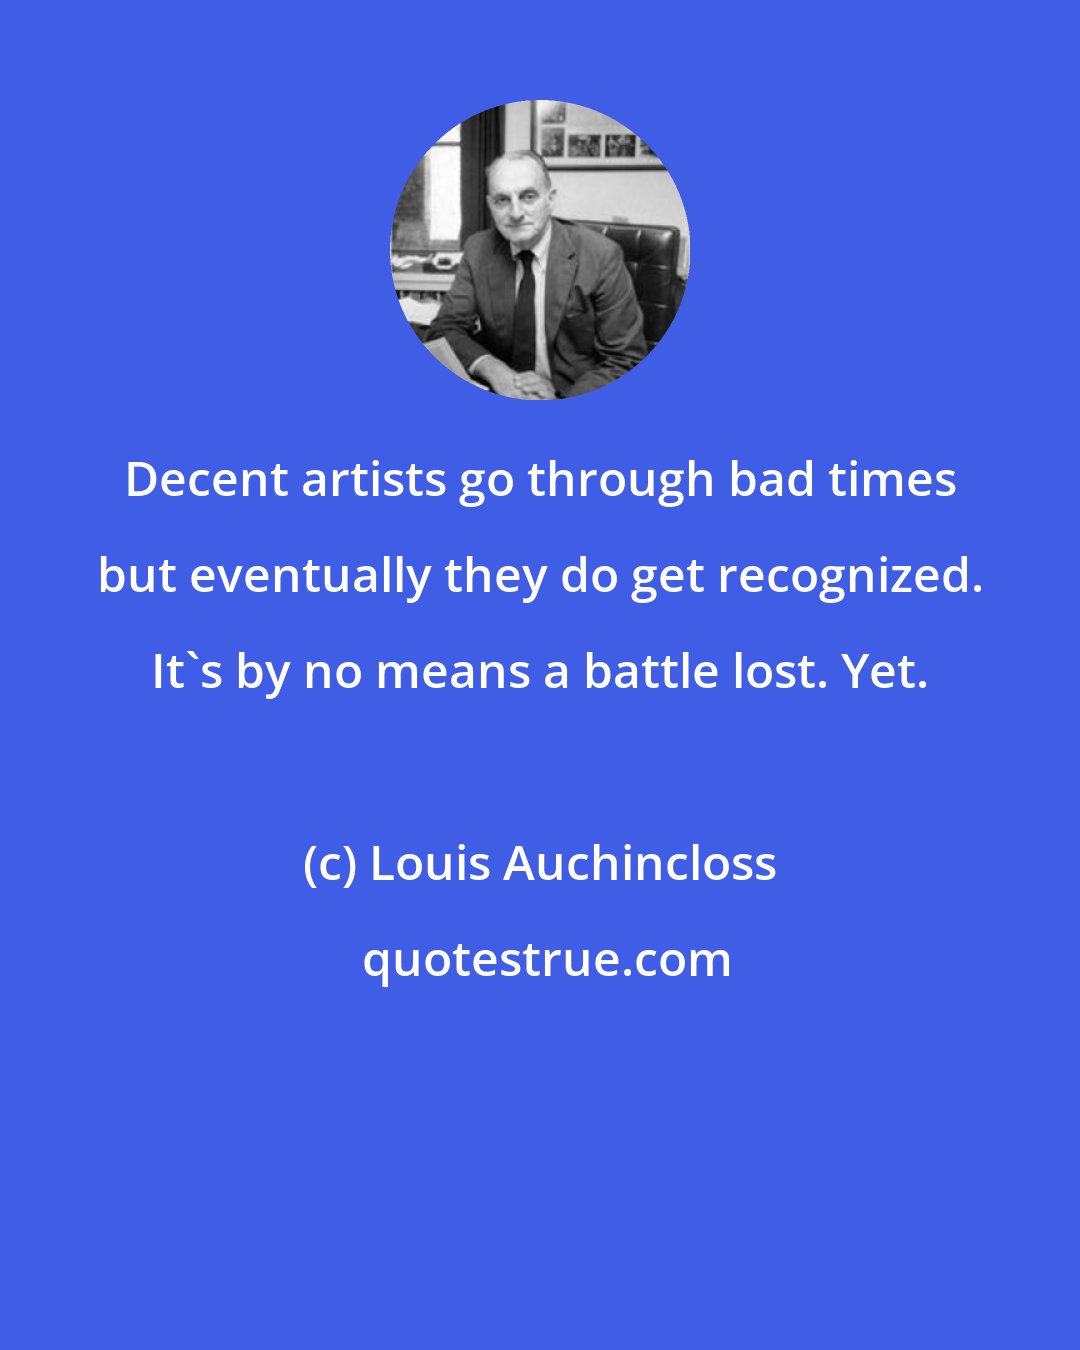 Louis Auchincloss: Decent artists go through bad times but eventually they do get recognized. It's by no means a battle lost. Yet.